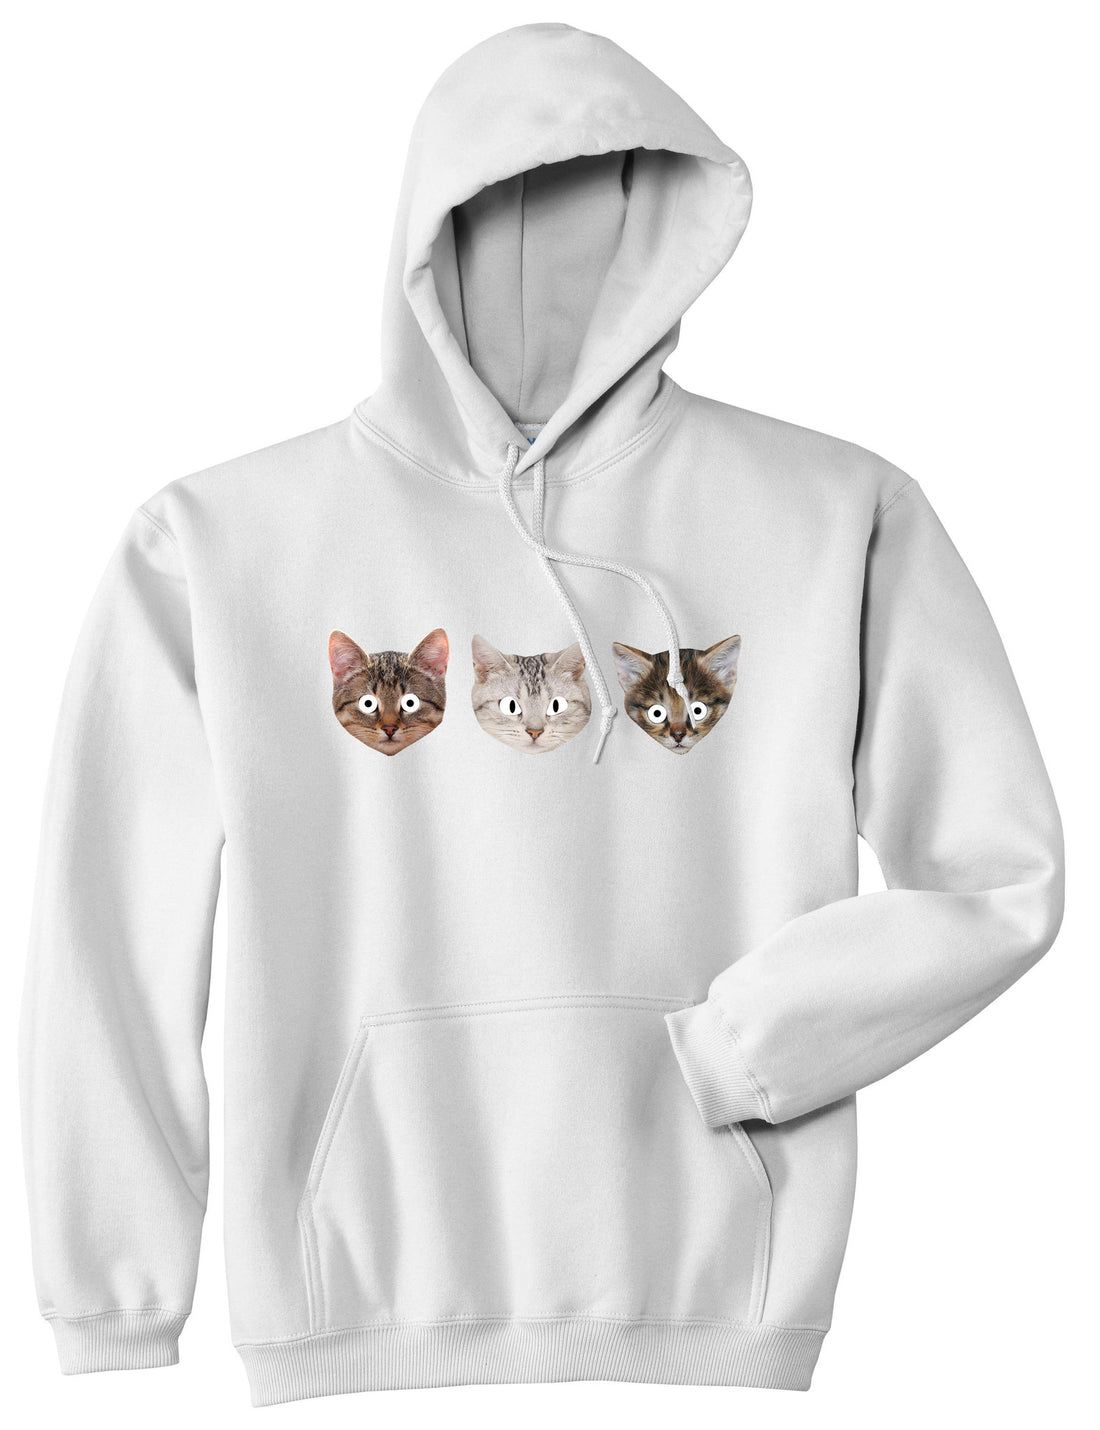 Cats Crazy Kittens Boys Kids Pullover Hoodie Hoody in White By Kings Of NY